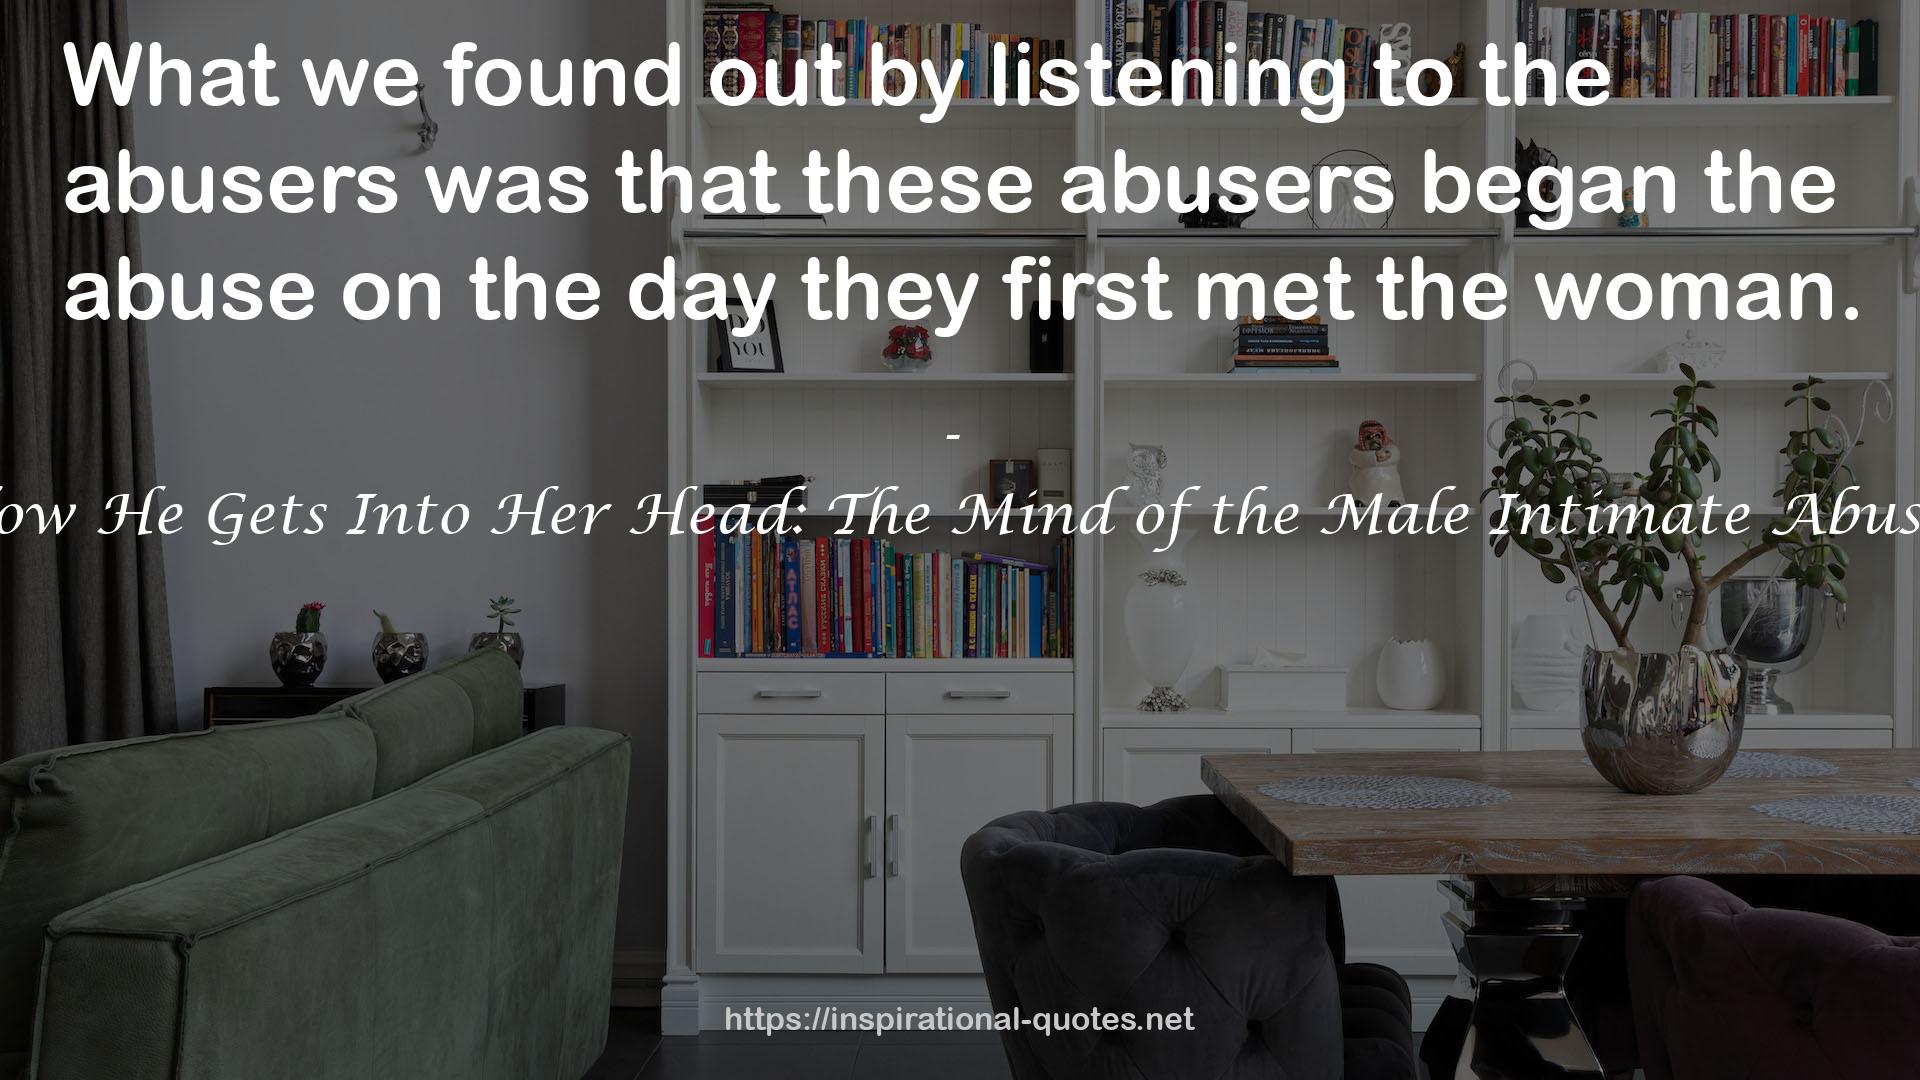 How He Gets Into Her Head: The Mind of the Male Intimate Abuser QUOTES